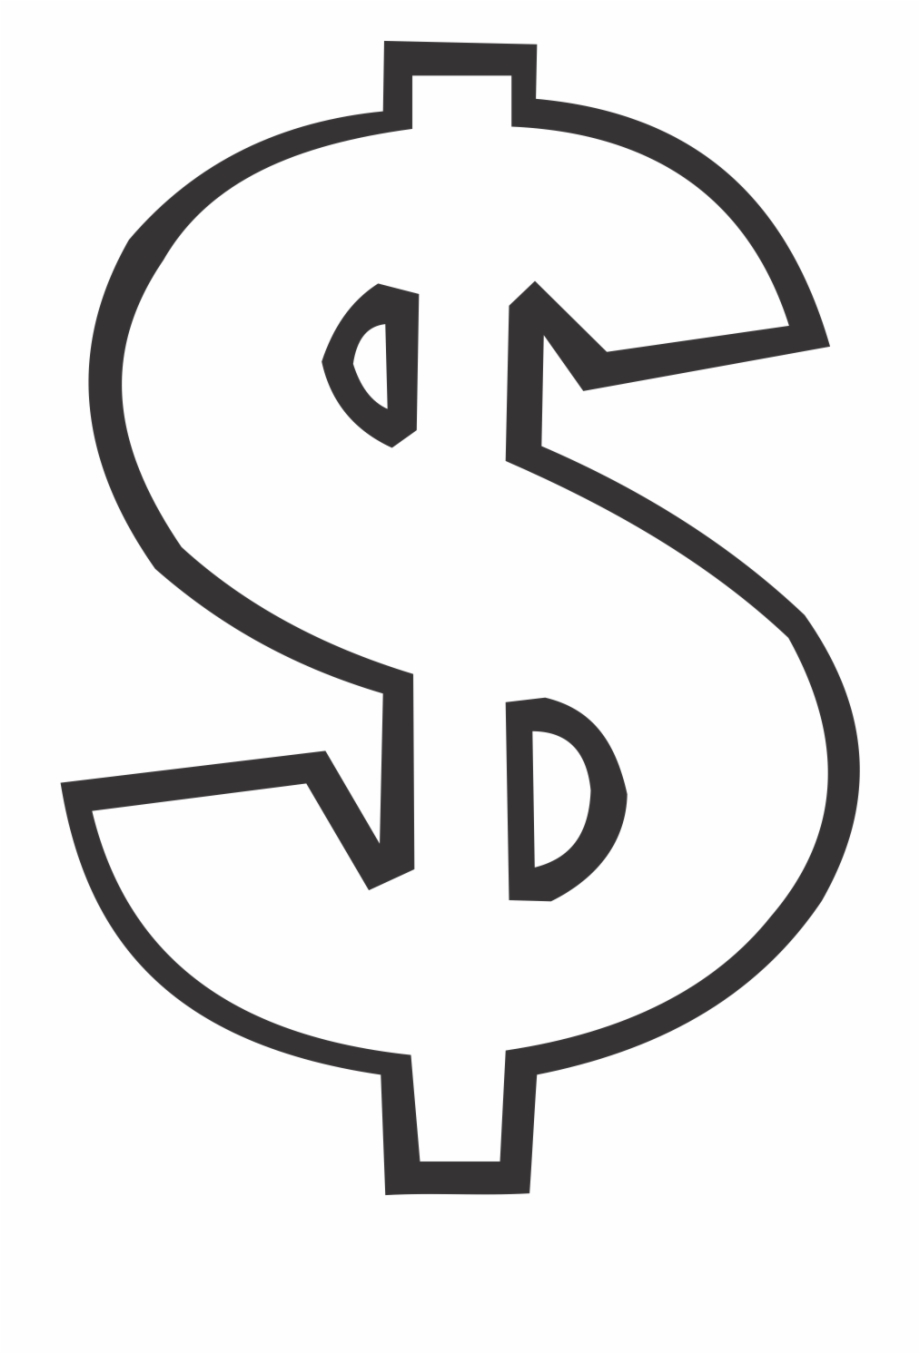 dollar signs clip art black and white